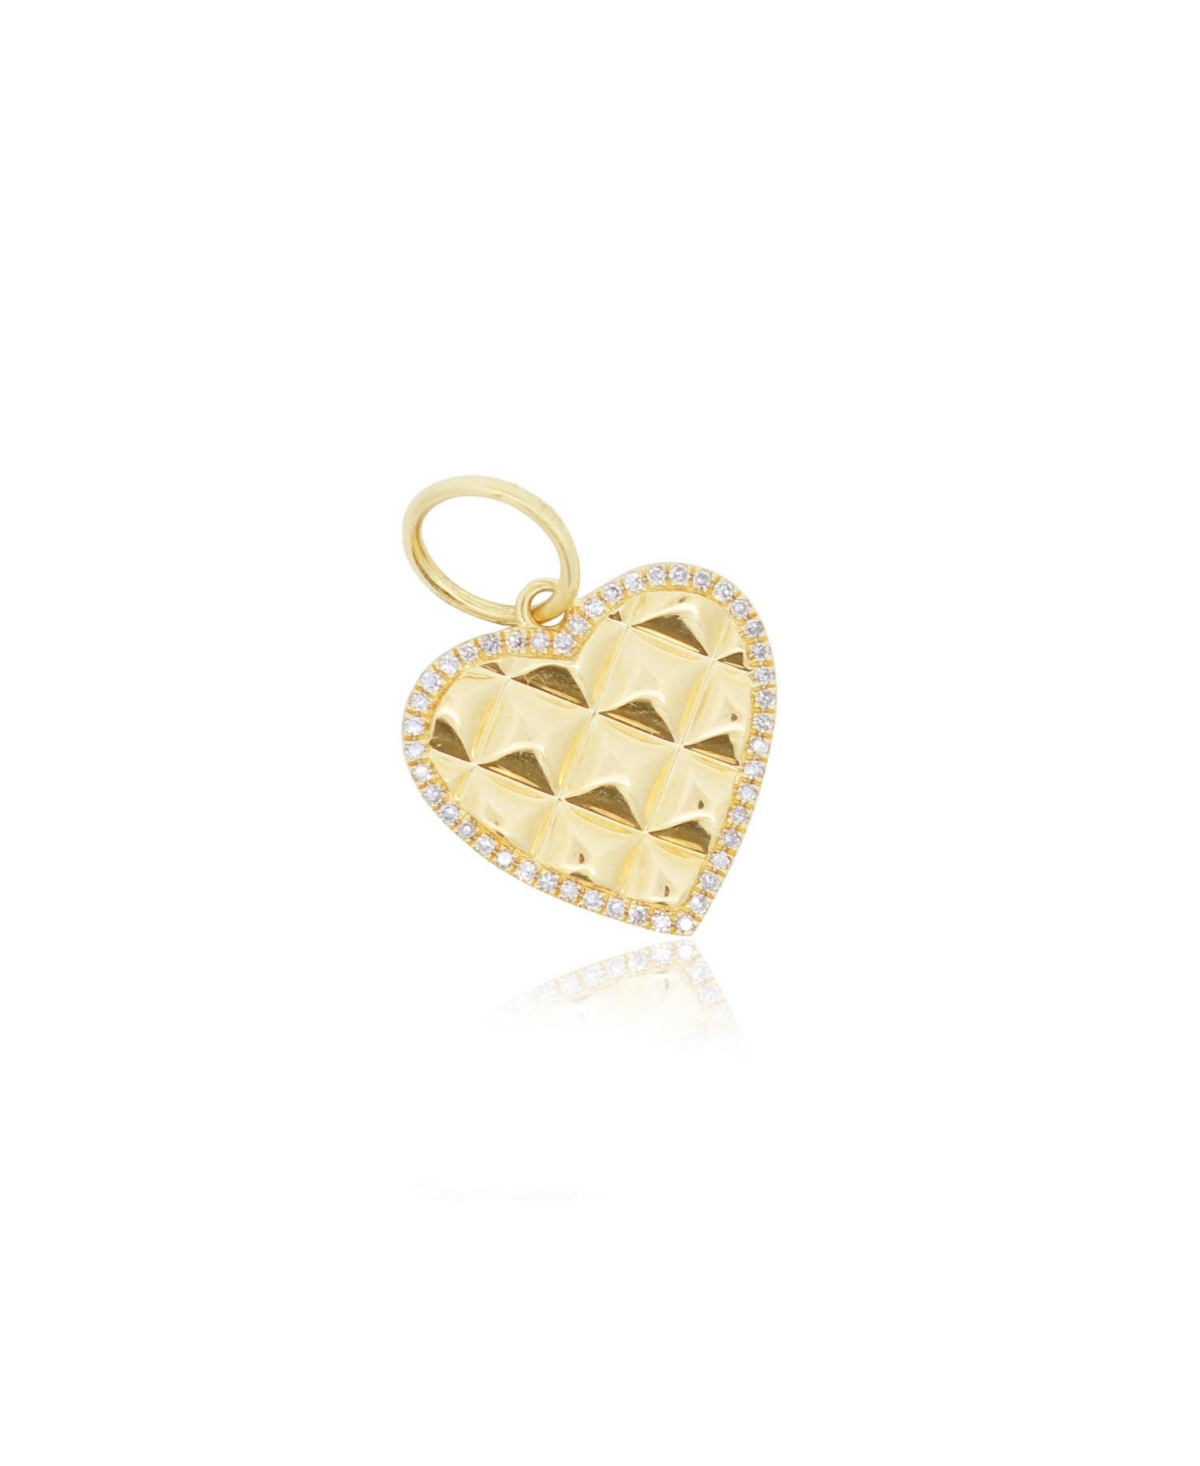 Studded Gold Heart Halo Charm - Gold